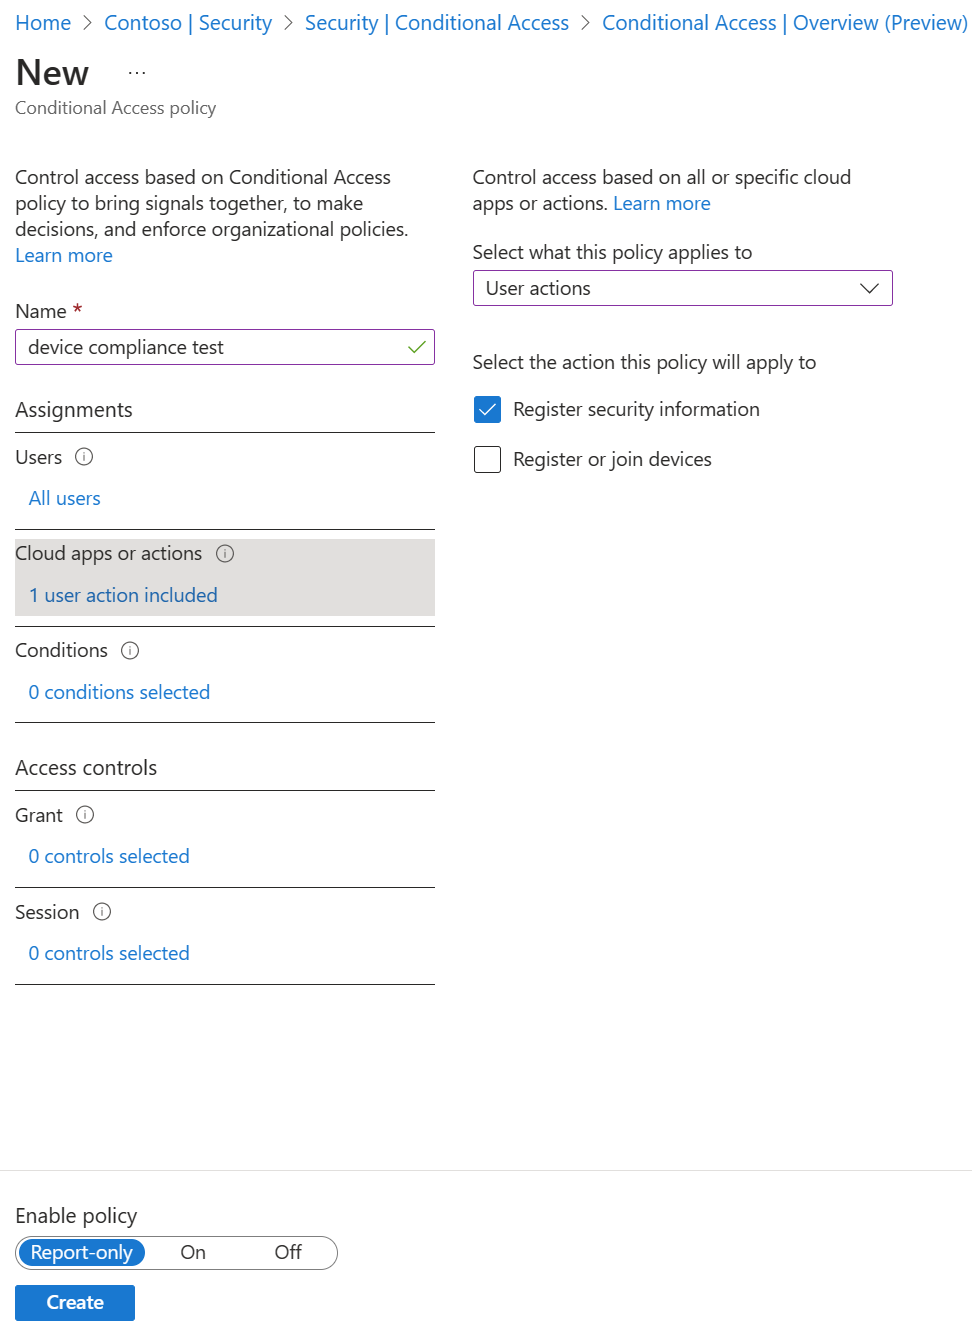 Create a conditional access policy to control security info registration